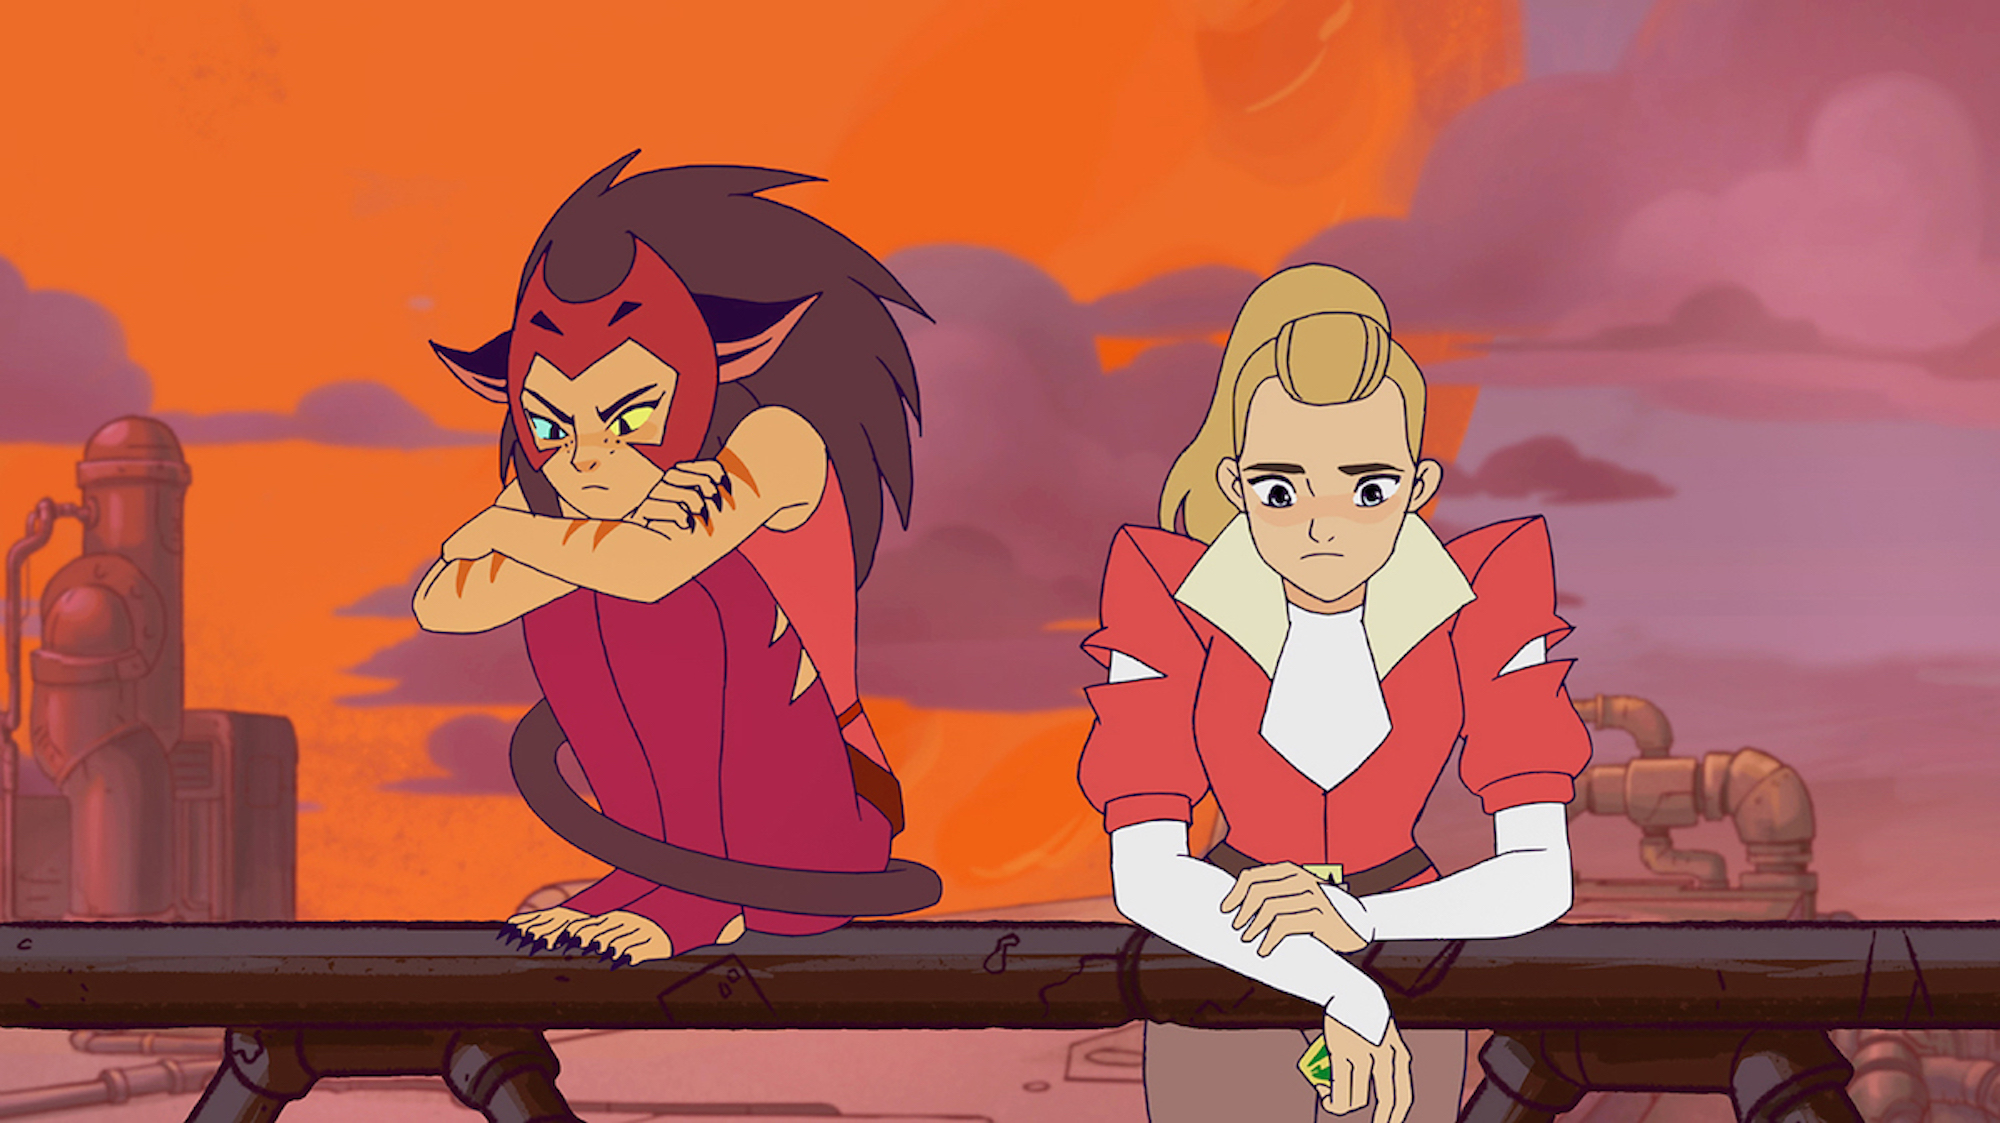 Catra and Adora talk in the Horde in Season 1, 'She-Ra and the Princesses of Power'